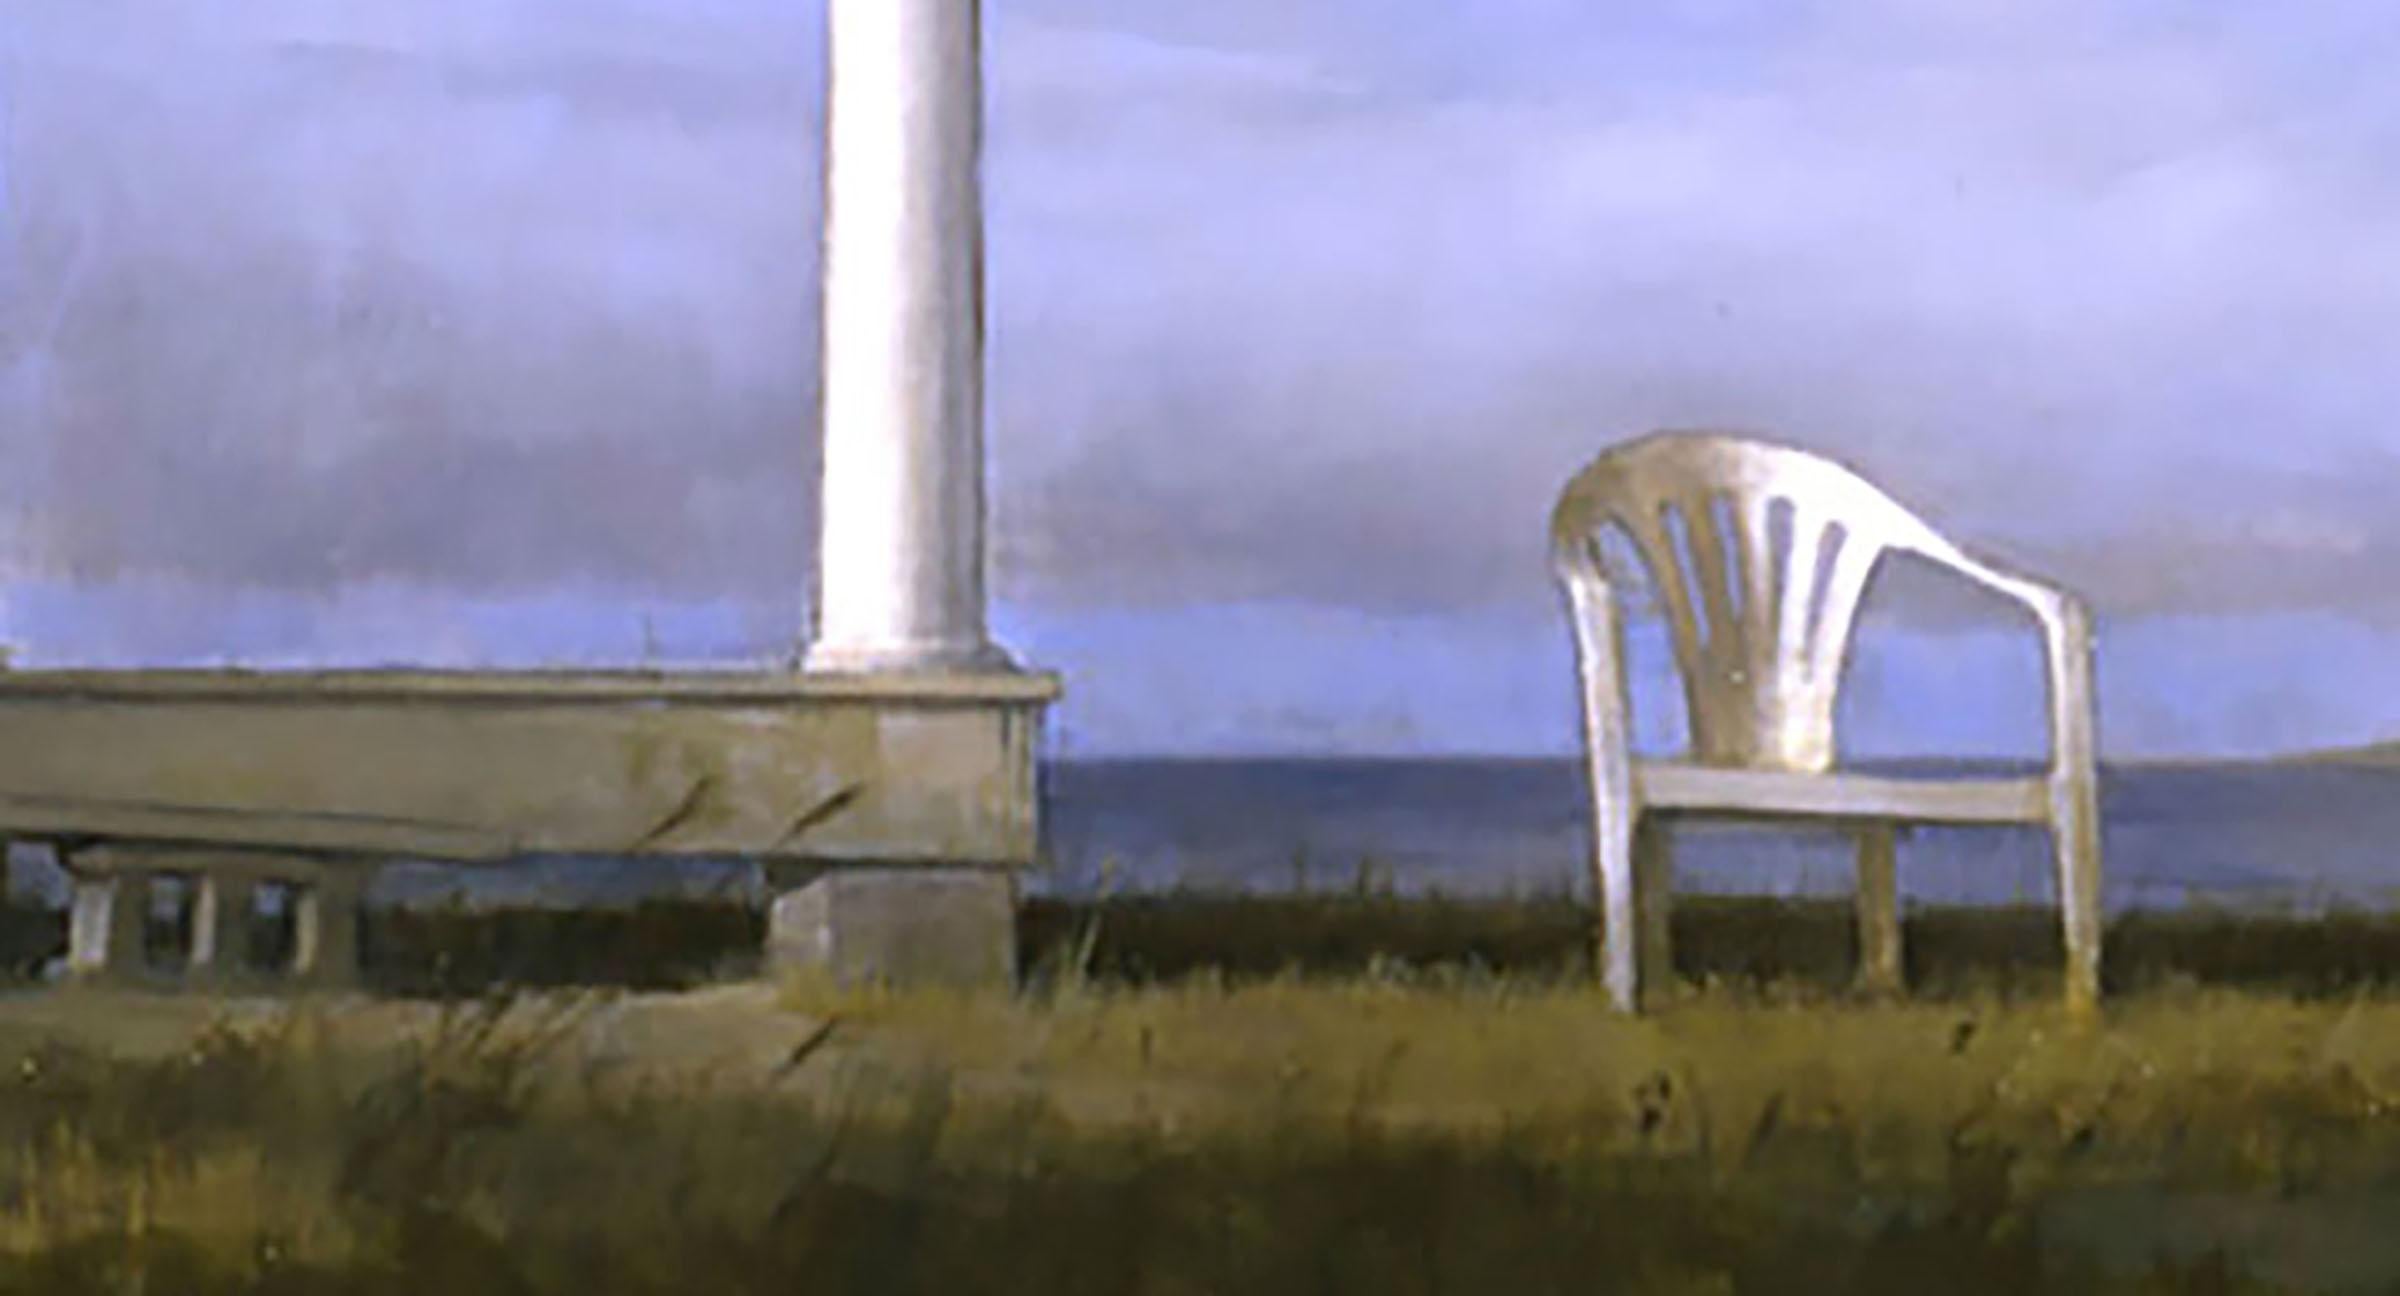 Lookout - Painting by Randall Exon